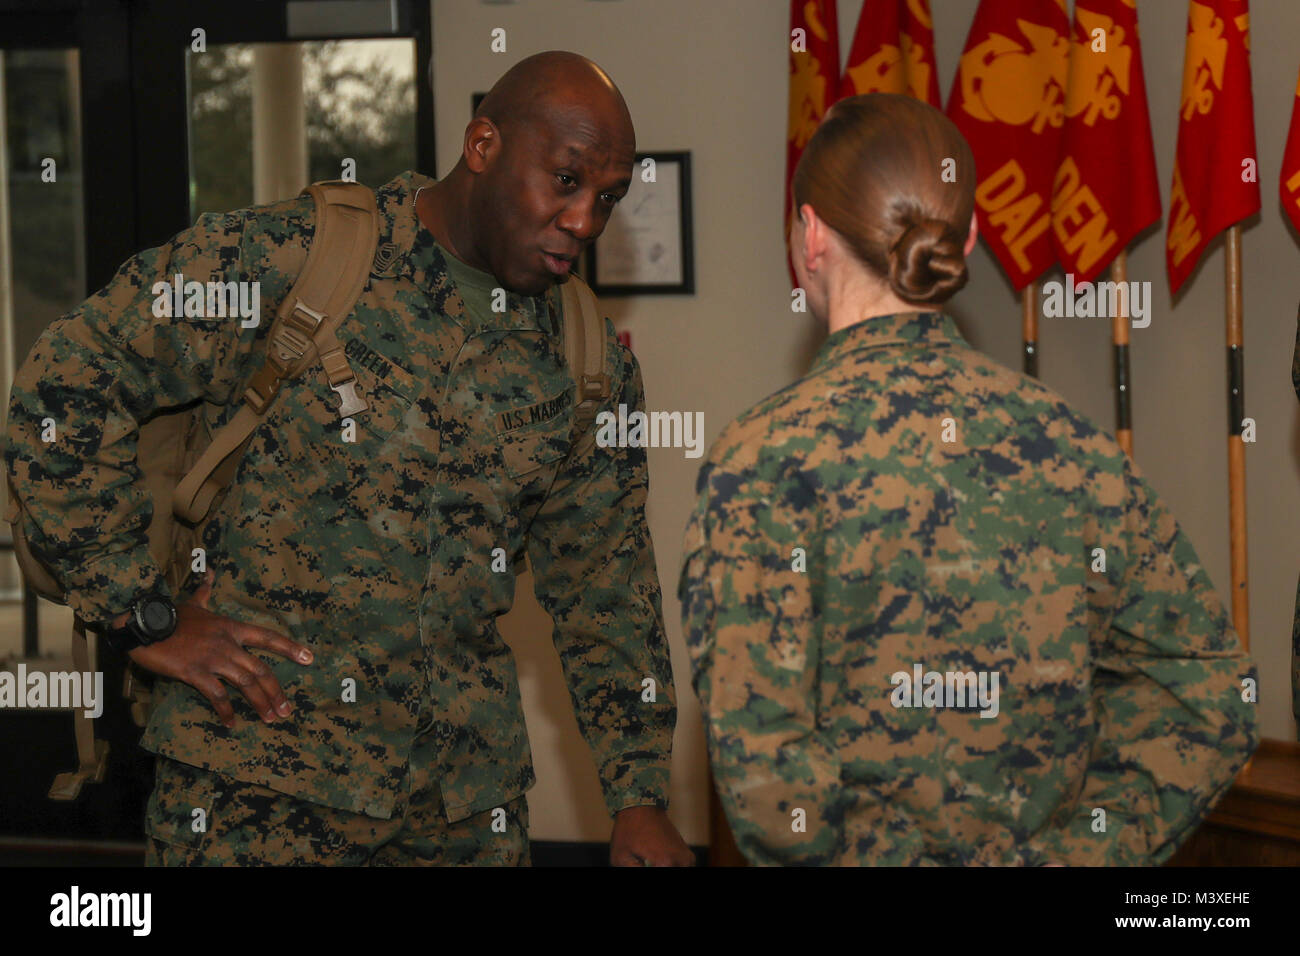 U.S. Marine Corps Sgt. Maj. Ronald L. Green, Sgt. Maj. of the Marine Corps, and Sgt. Sarah Steiert, Motor transportation Chief with 8th Marine Corps Recruiting District, engaging in a conversation on Naval Air Station Joint Reverse Base on February 6, 2018. The 8th Marine Corps Recruiting District is the largest district, covering over 1 million square miles in 13 states. (U.S. Marine Corps photo by Sgt. Clarence A. Leake) Stock Photo